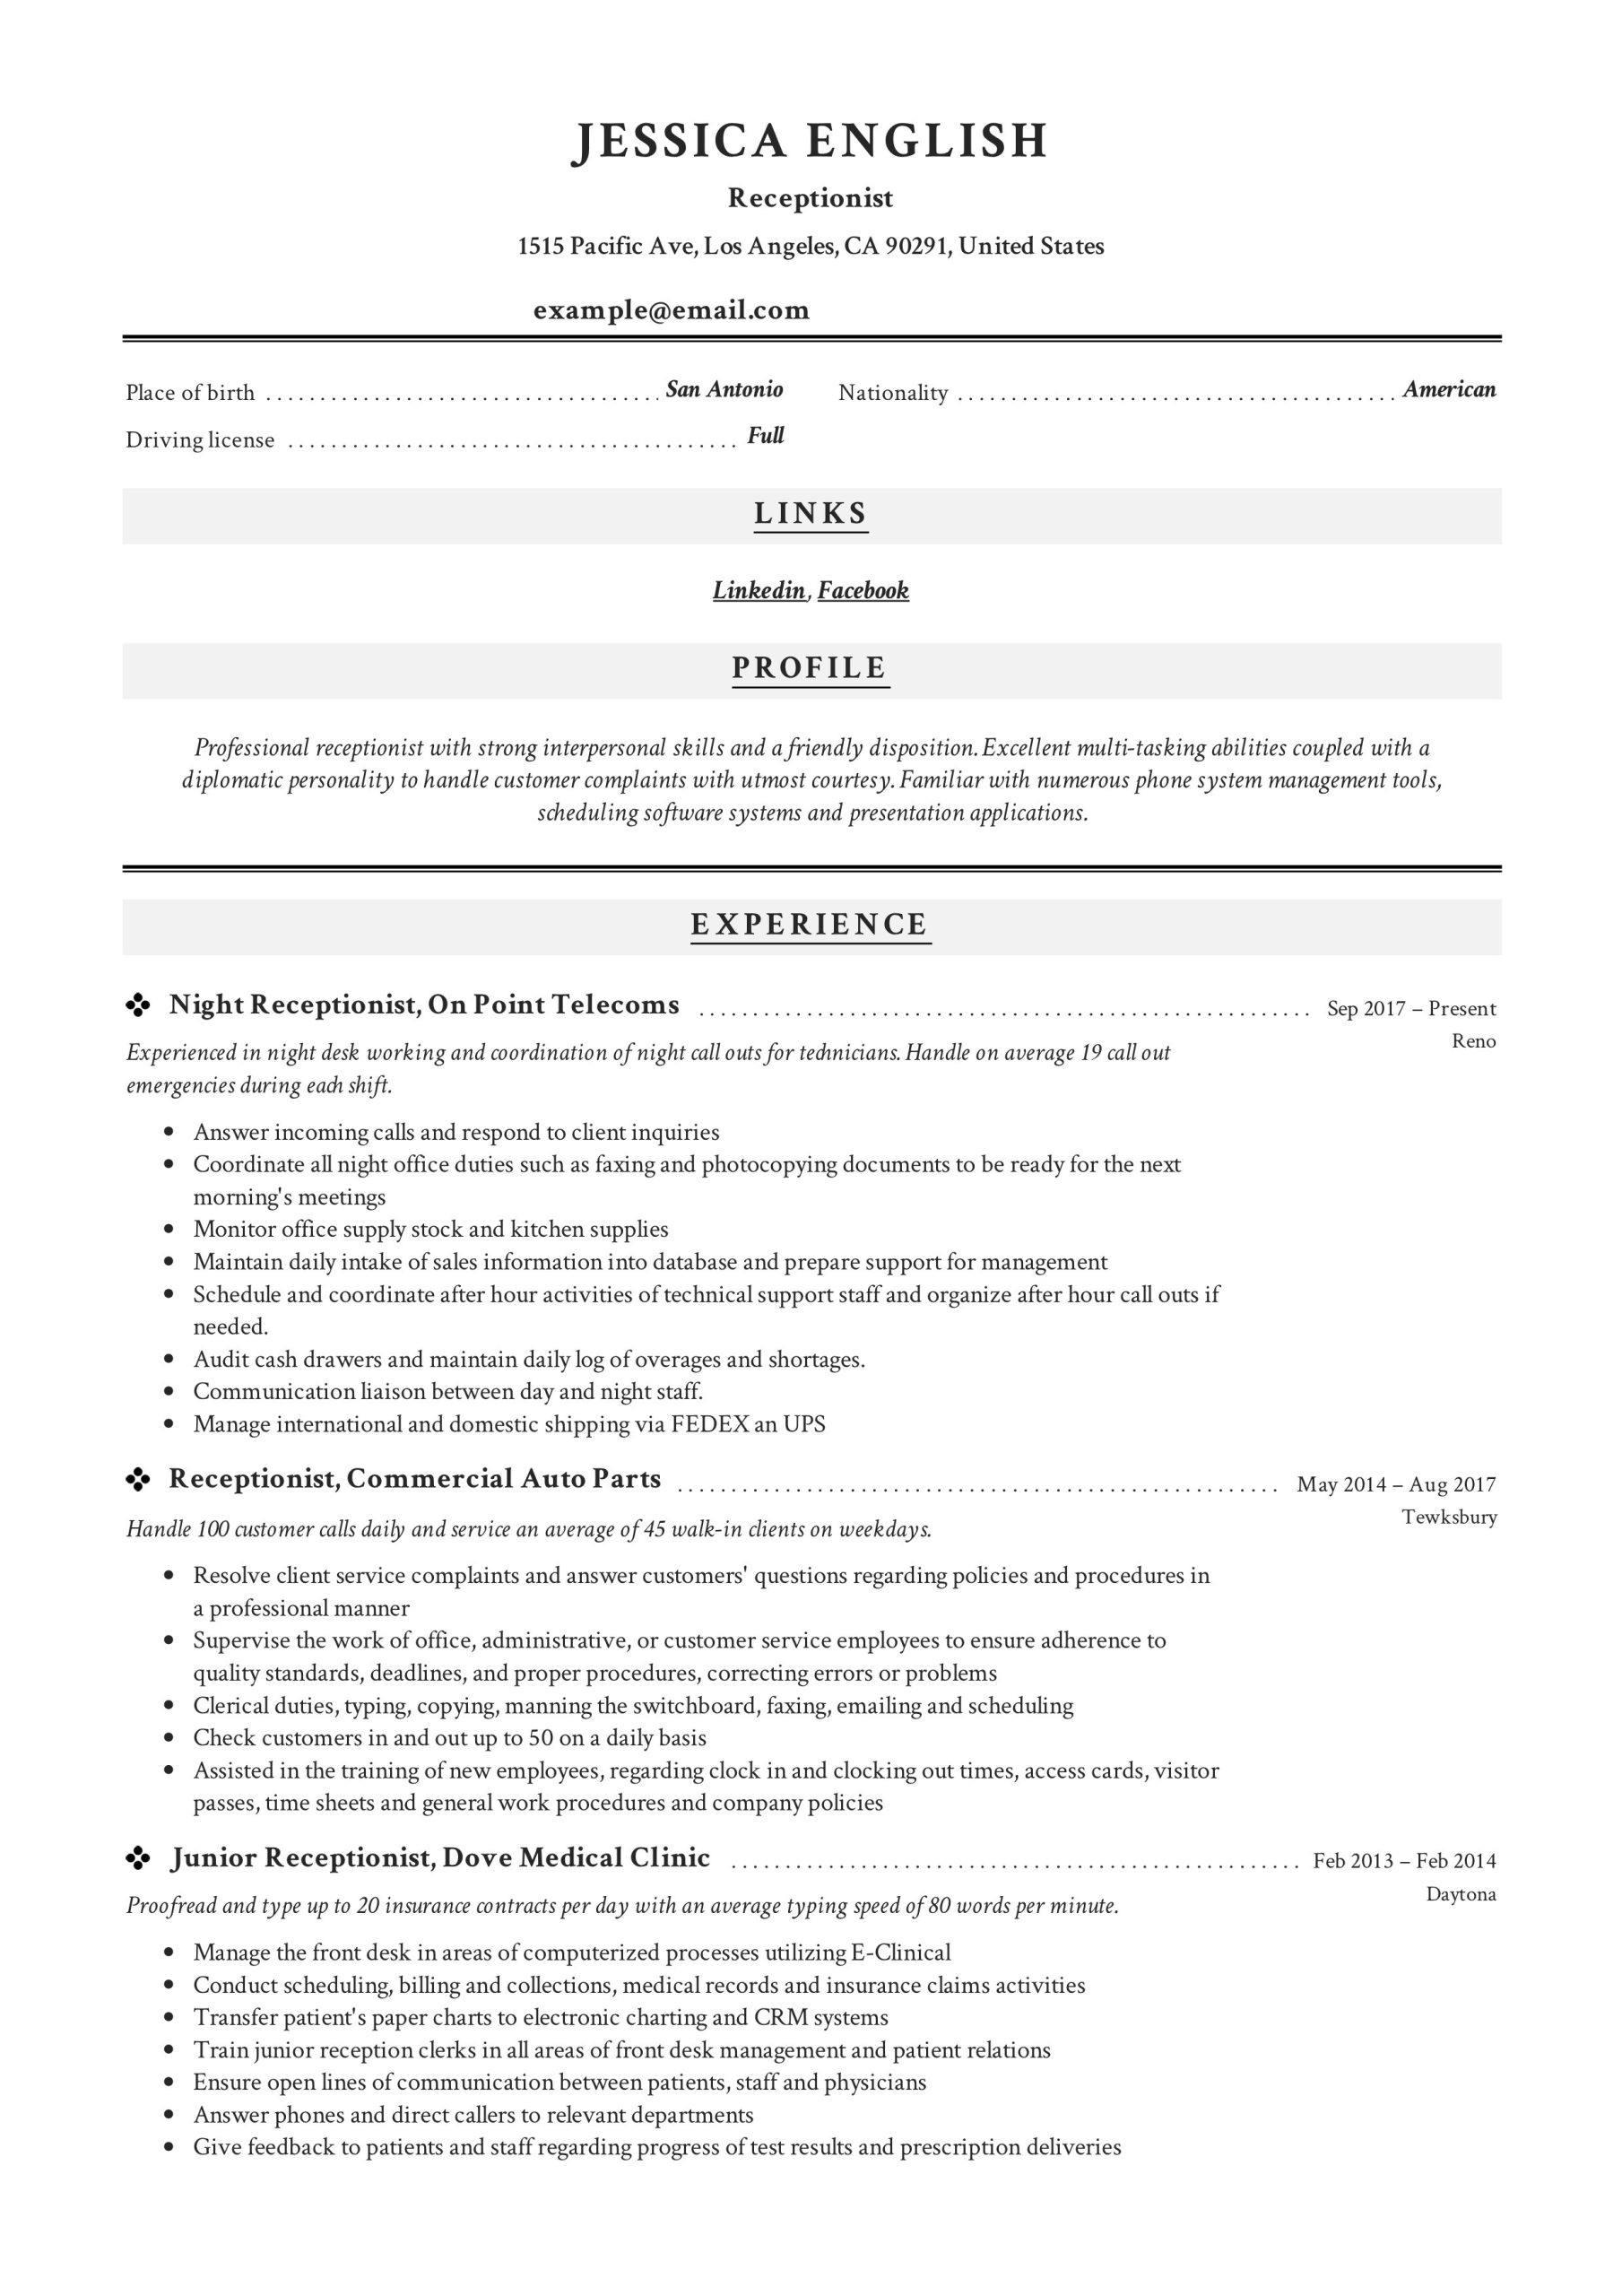 Receptionist Resume Sample with No Experience Receptionist Resume Example & Writing Guide 12 Samples Pdf 2020